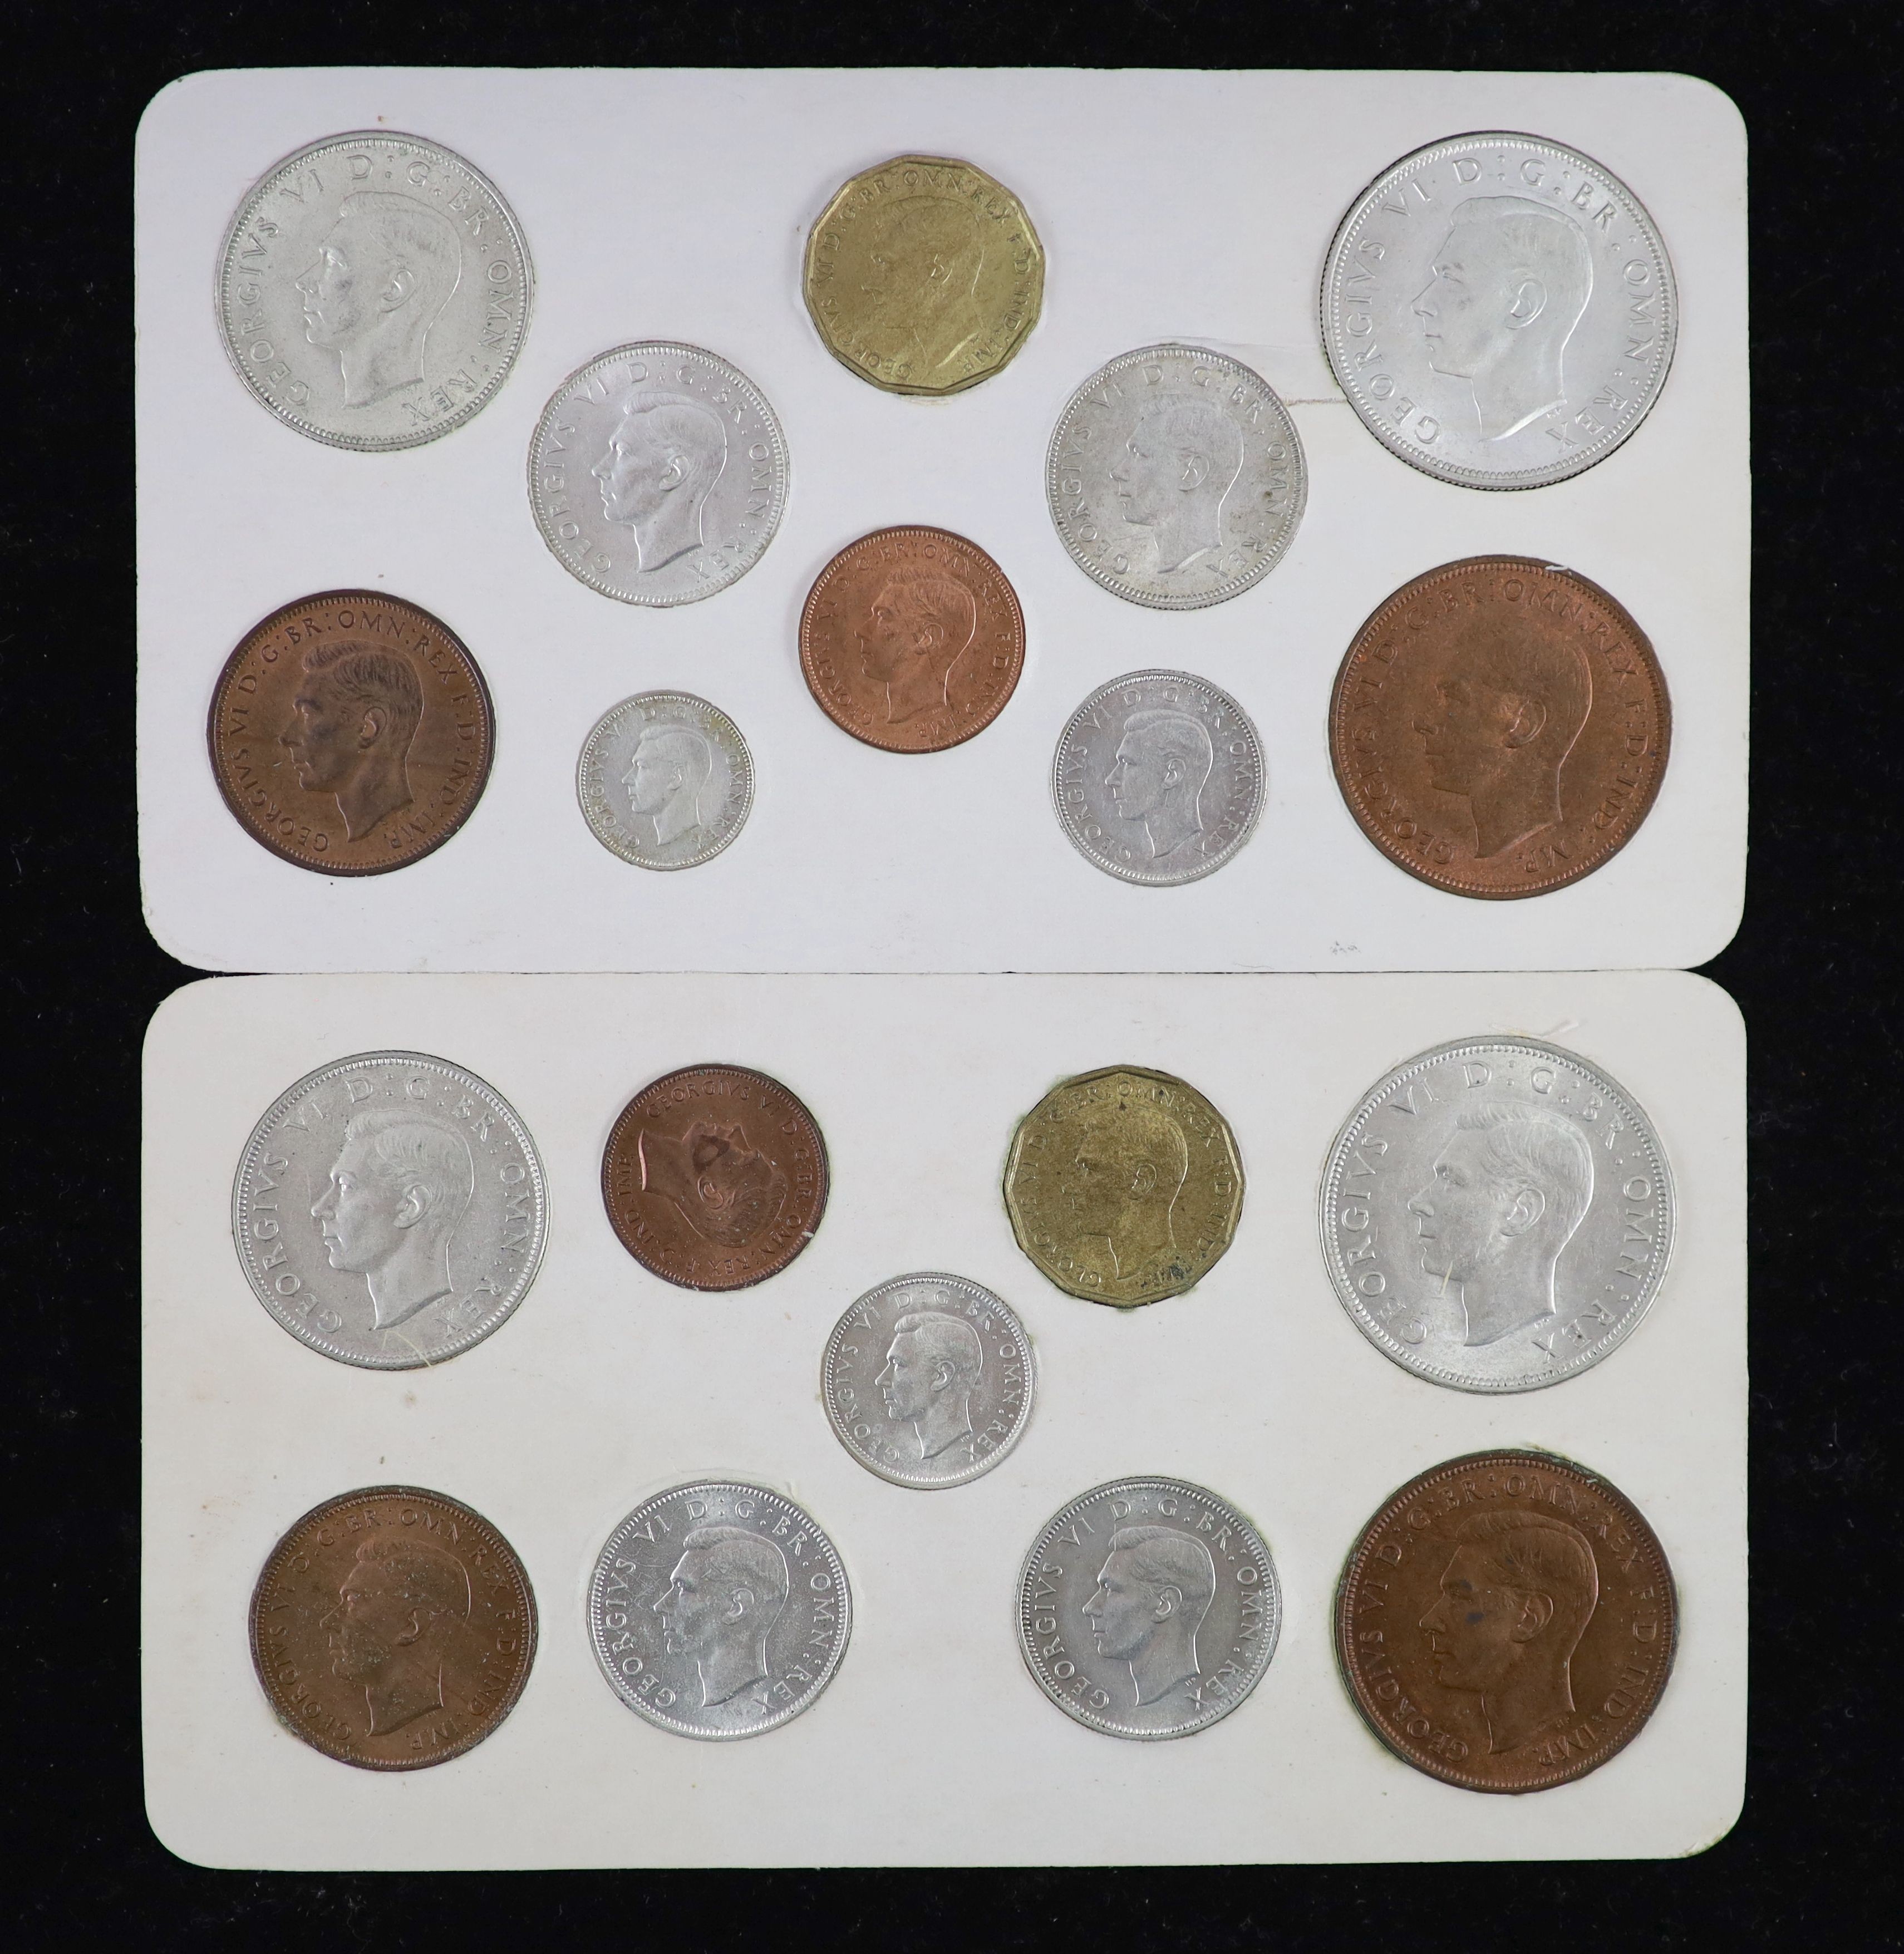 George VI specimen coin sets for 1944 and 1945, including the rare 1944 silver threepence, first - Image 4 of 8